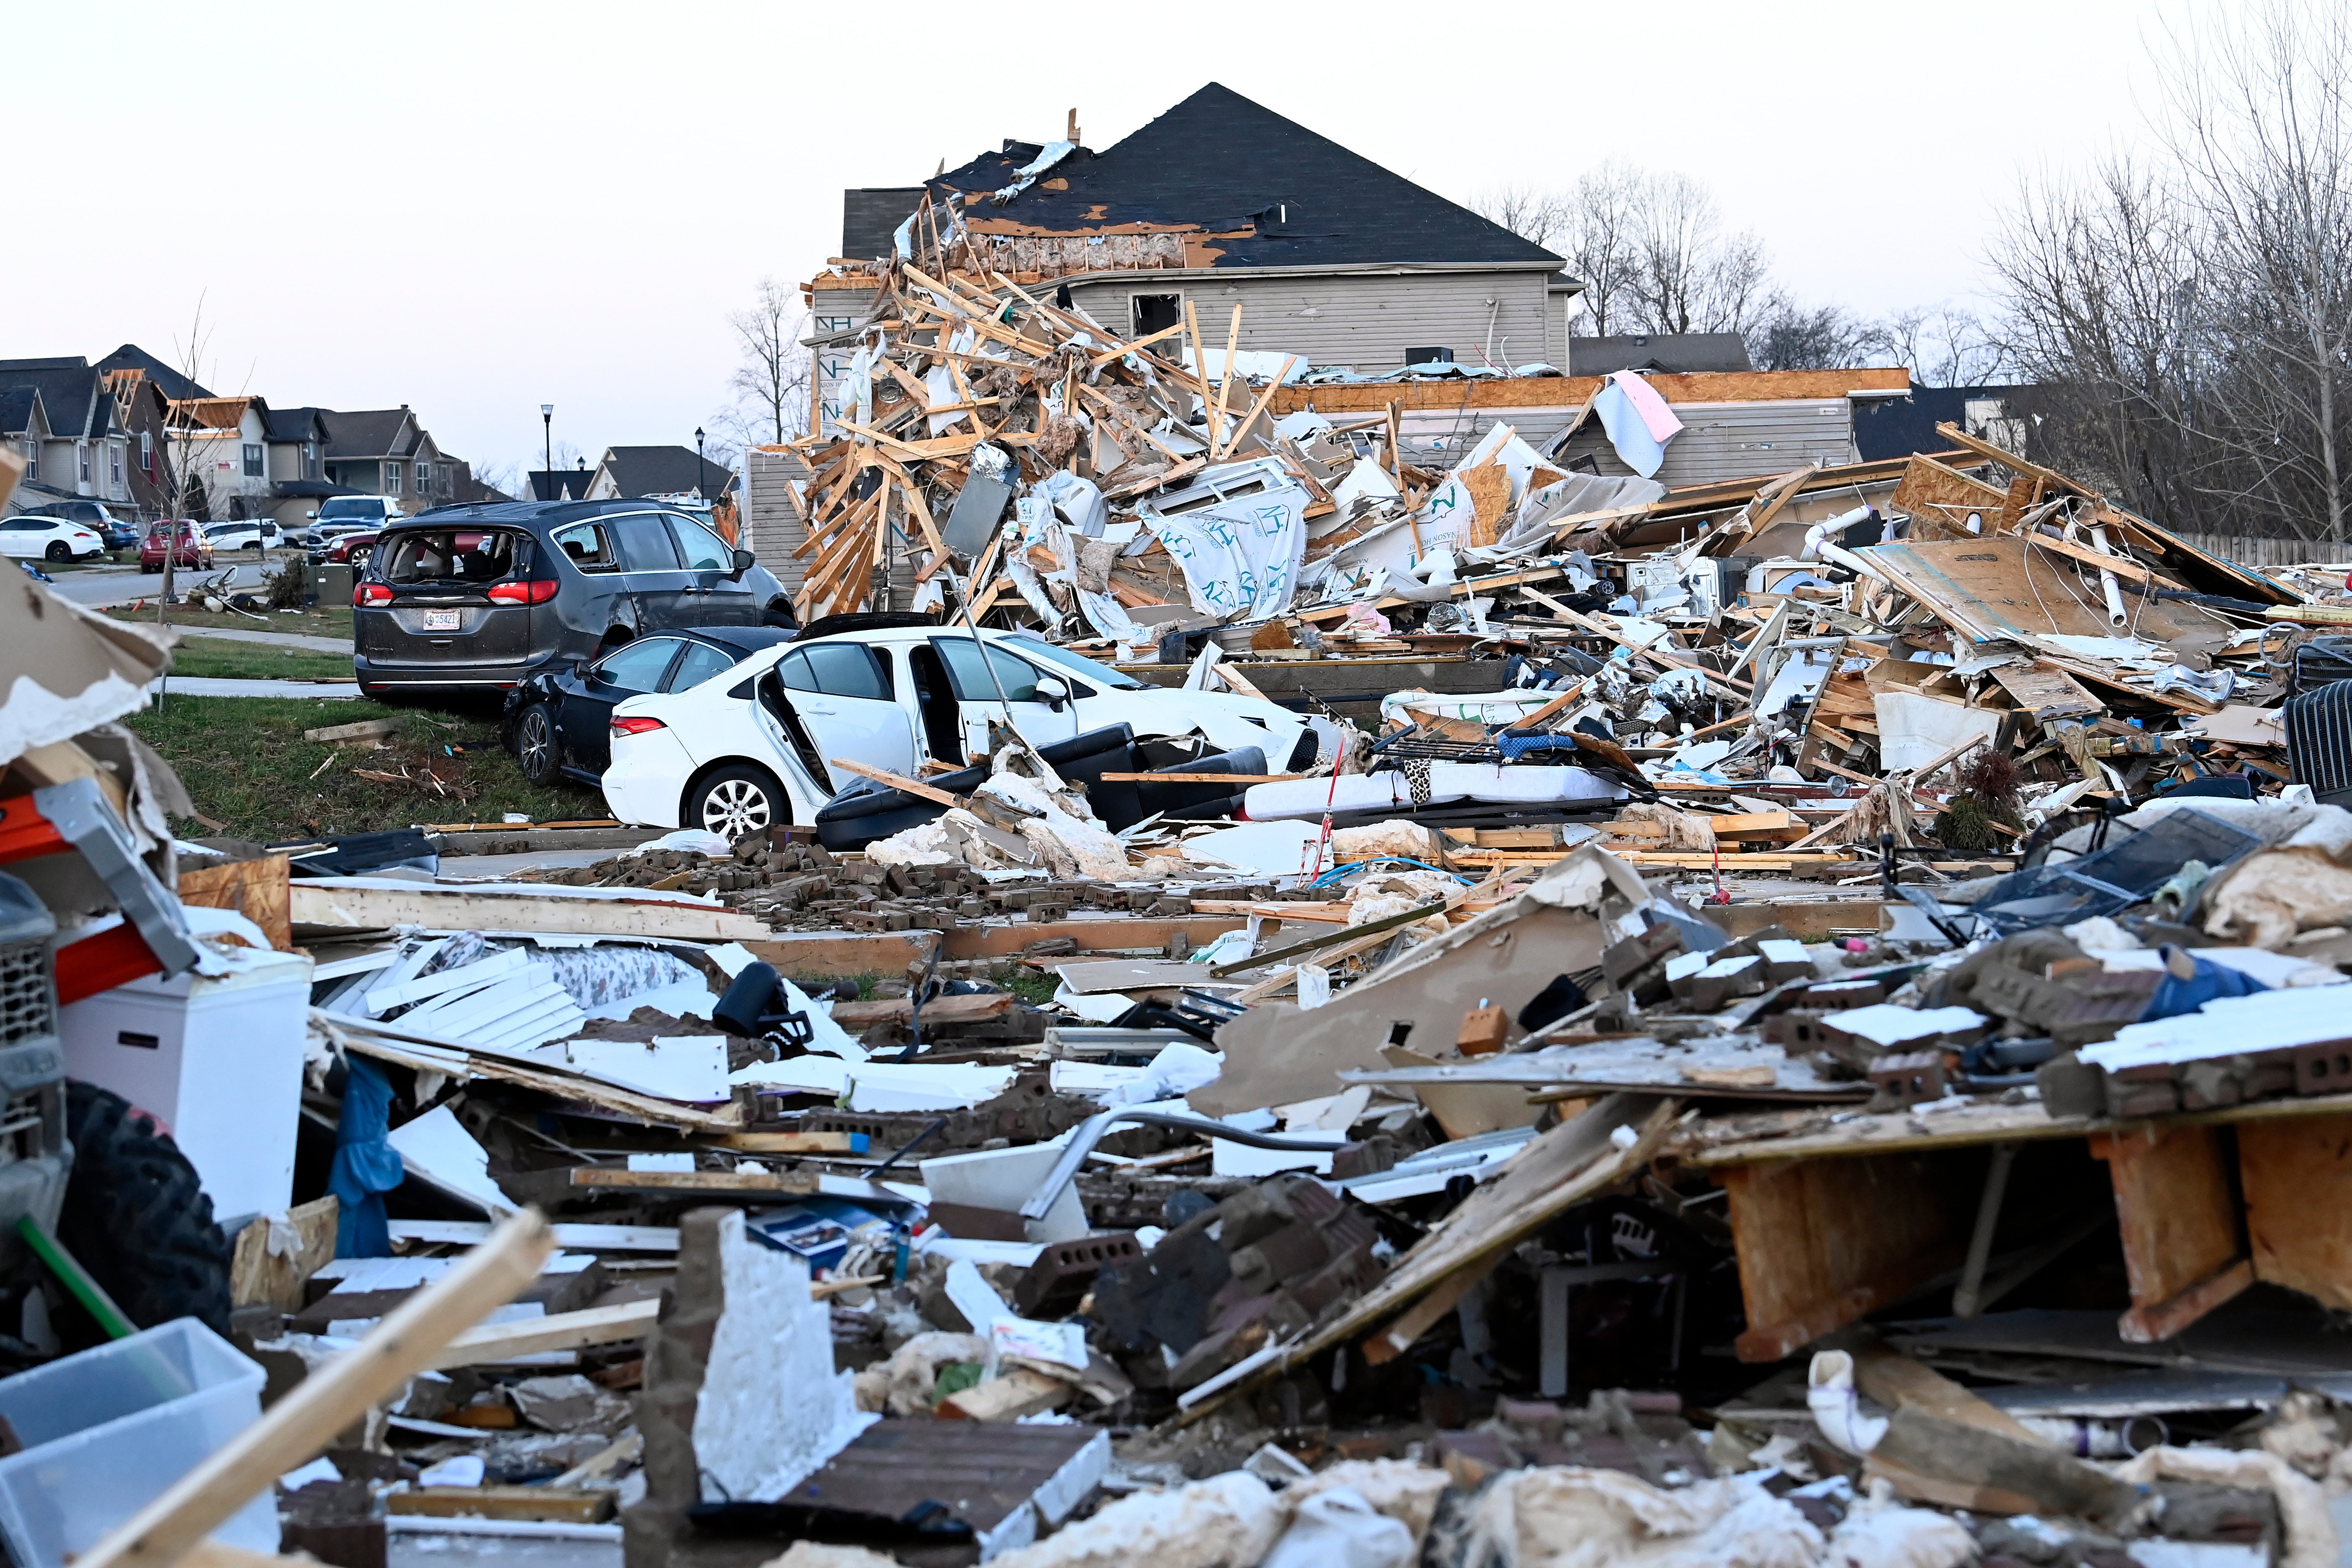 Debris covers the area around homes destroyed in the West Creek Farms neighbourhood of Clarksville, Tennessee on Sunday